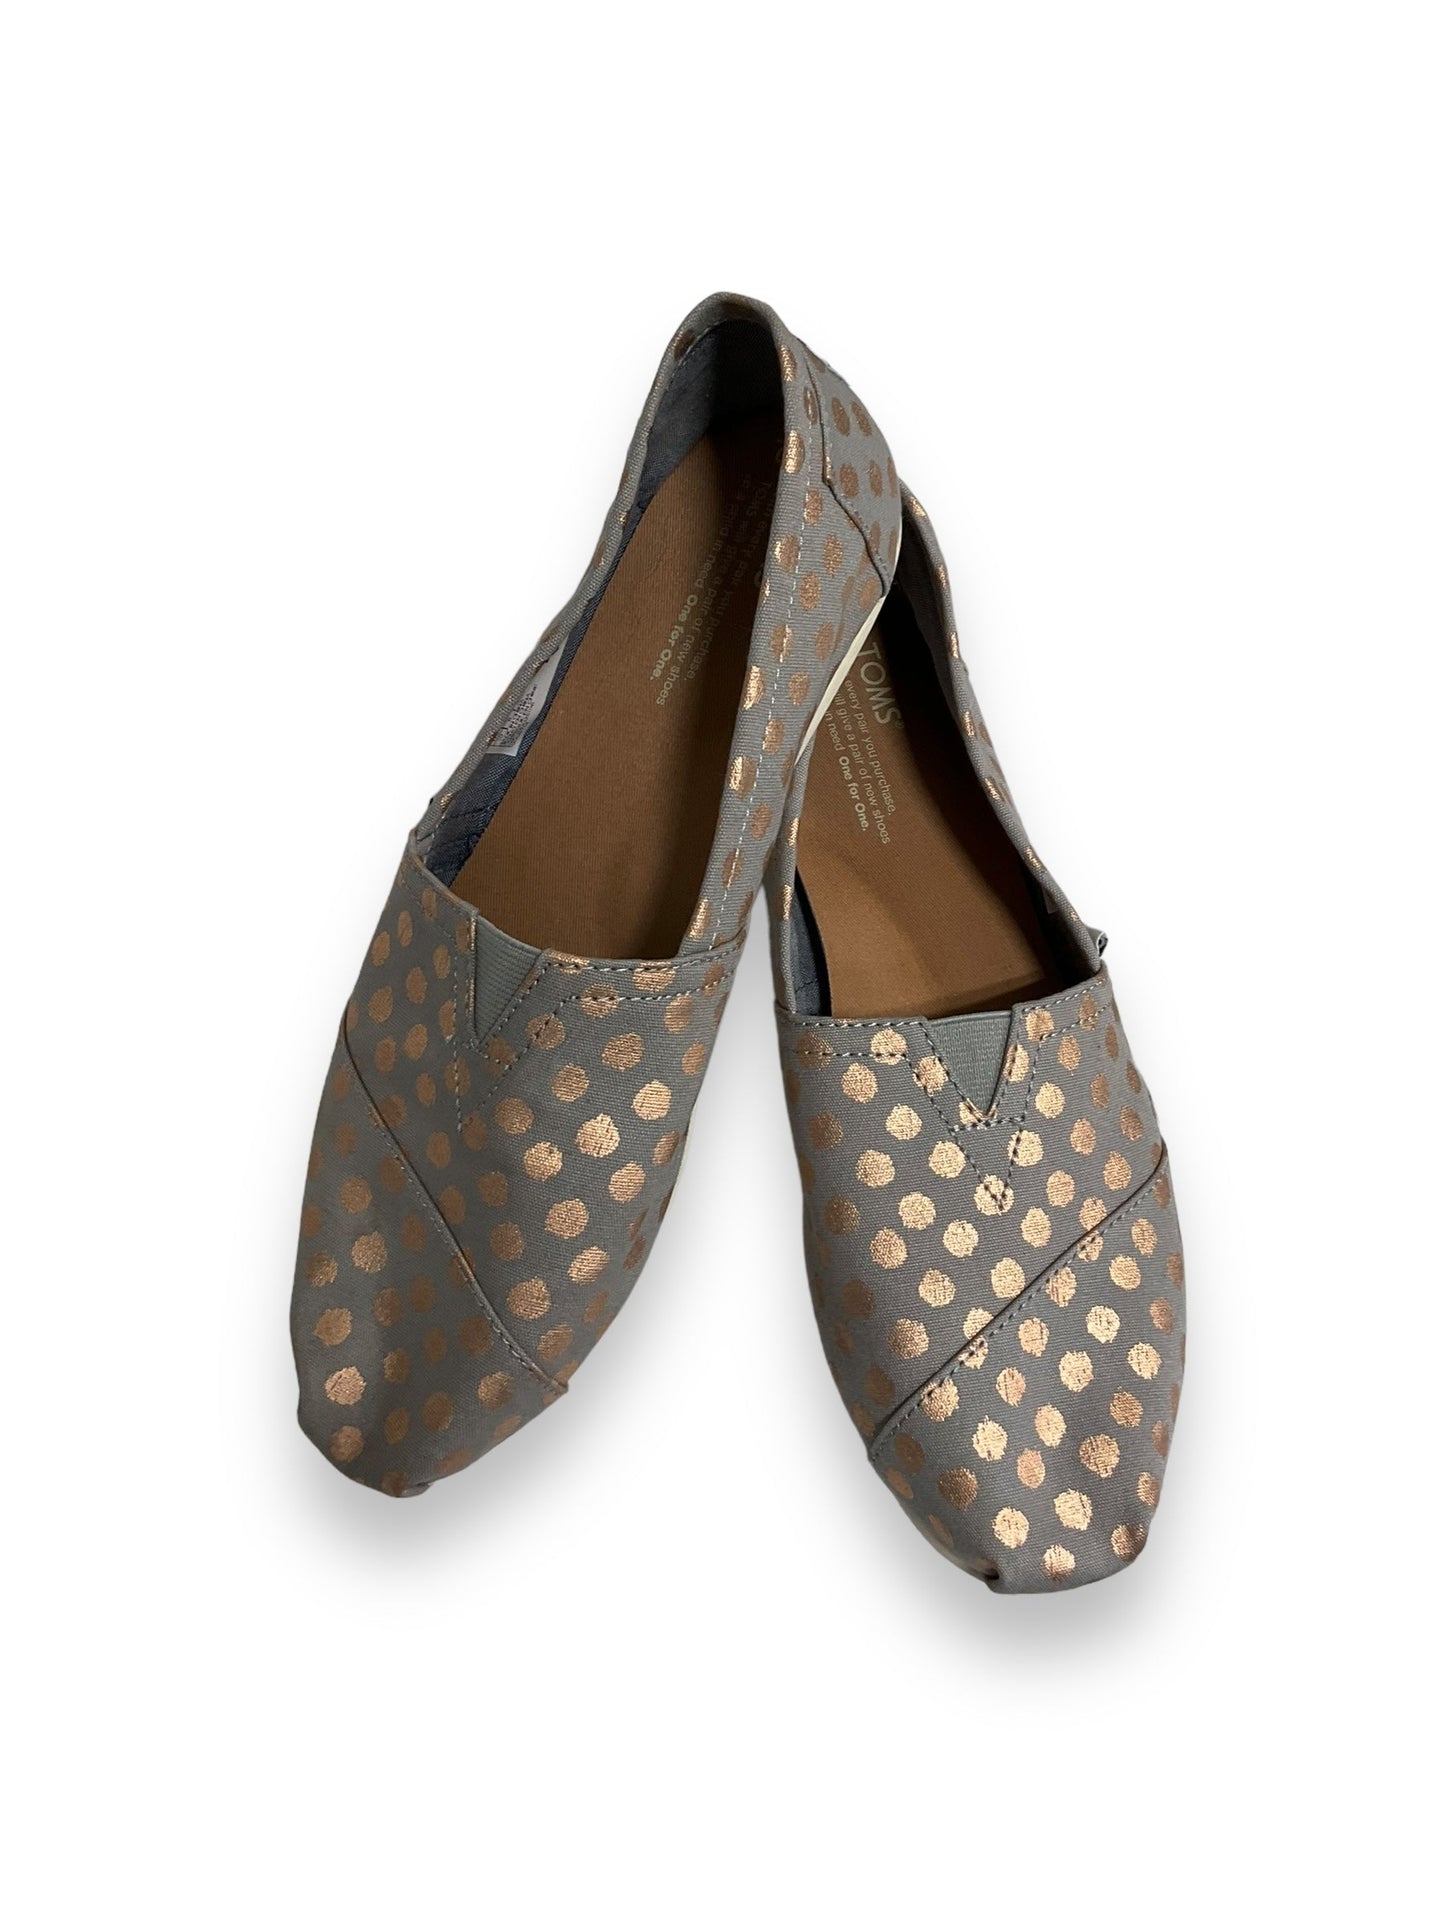 Shoes Flats By Toms  Size: 10